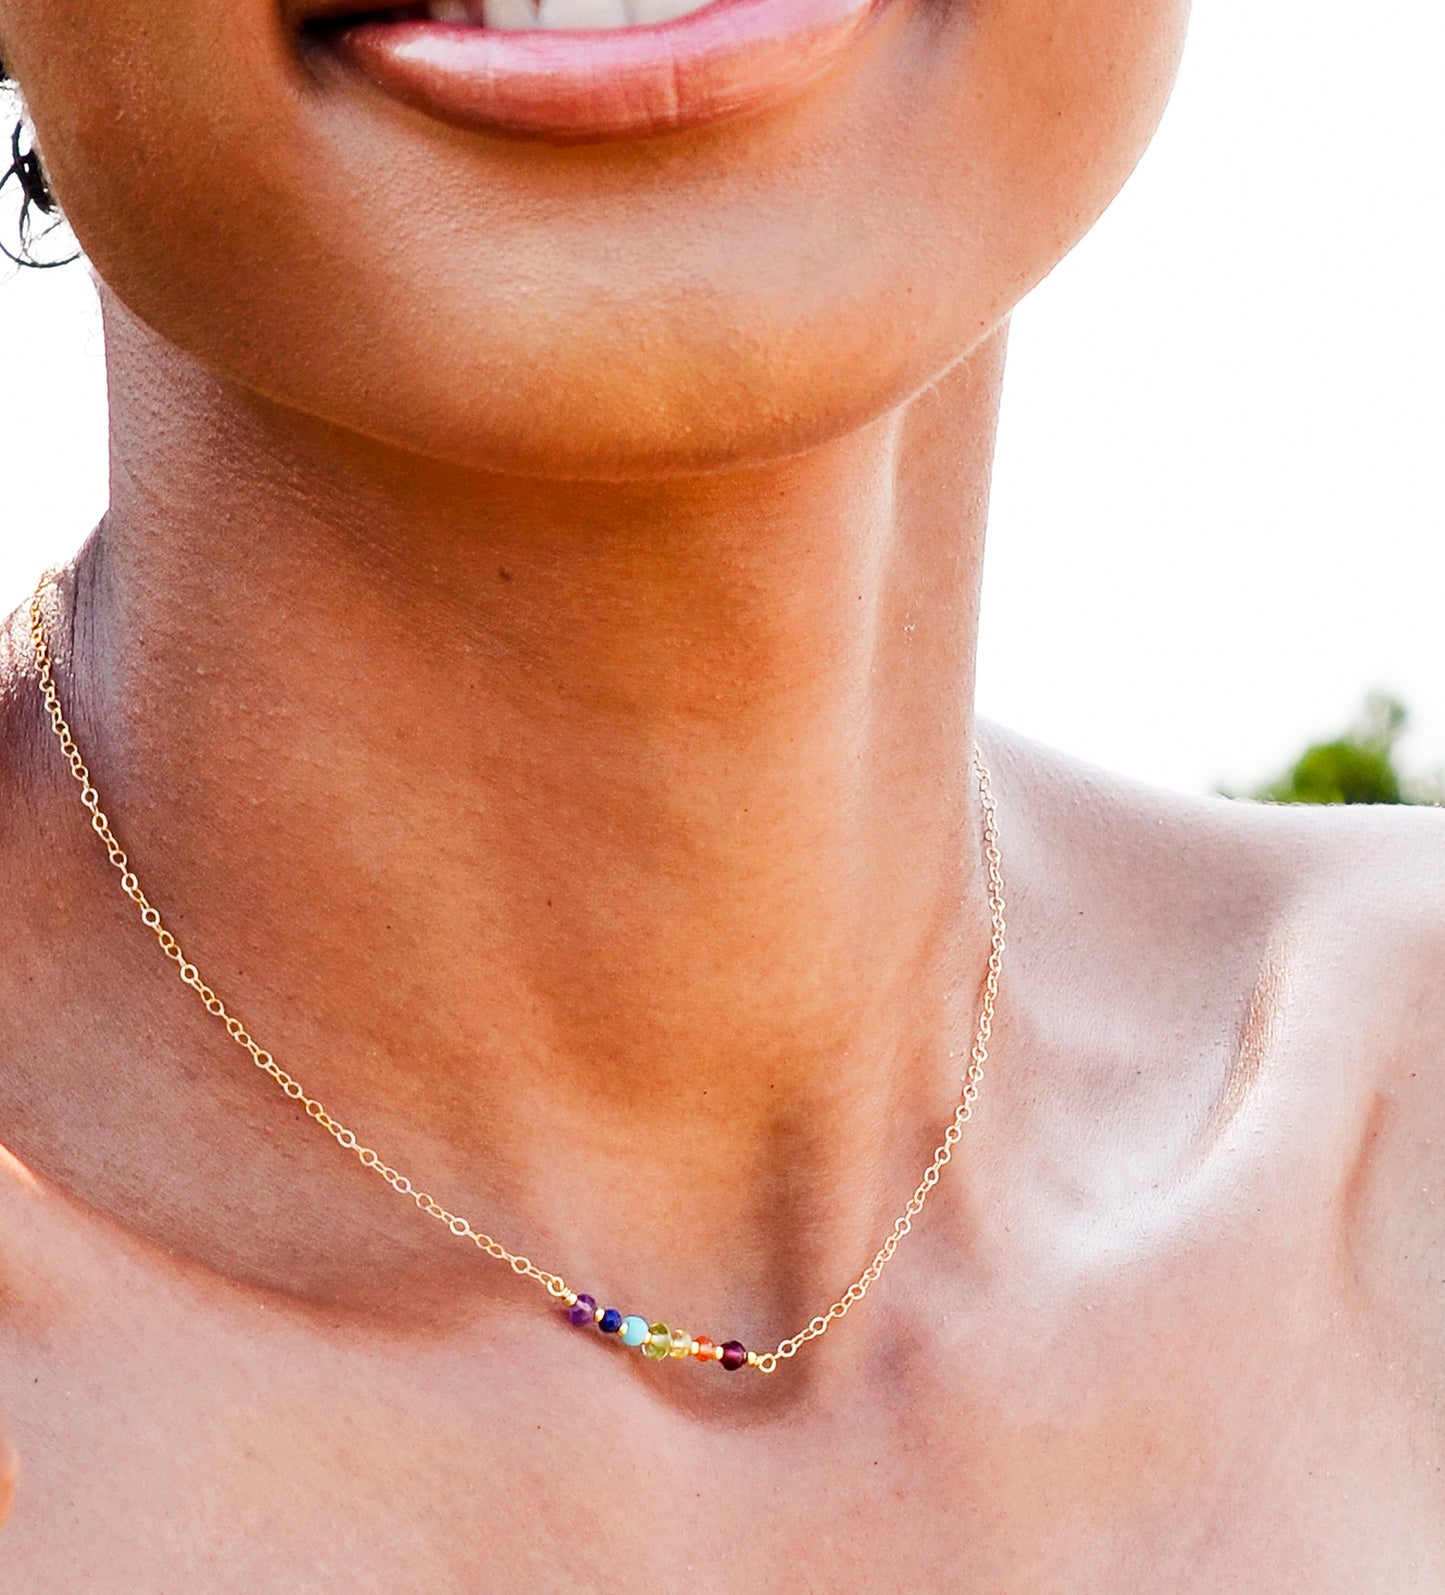 Rainbow Crystal Chakra Necklace, Handmade by GEMNIA. Modeled chakra pendant on gold or silver chain. 